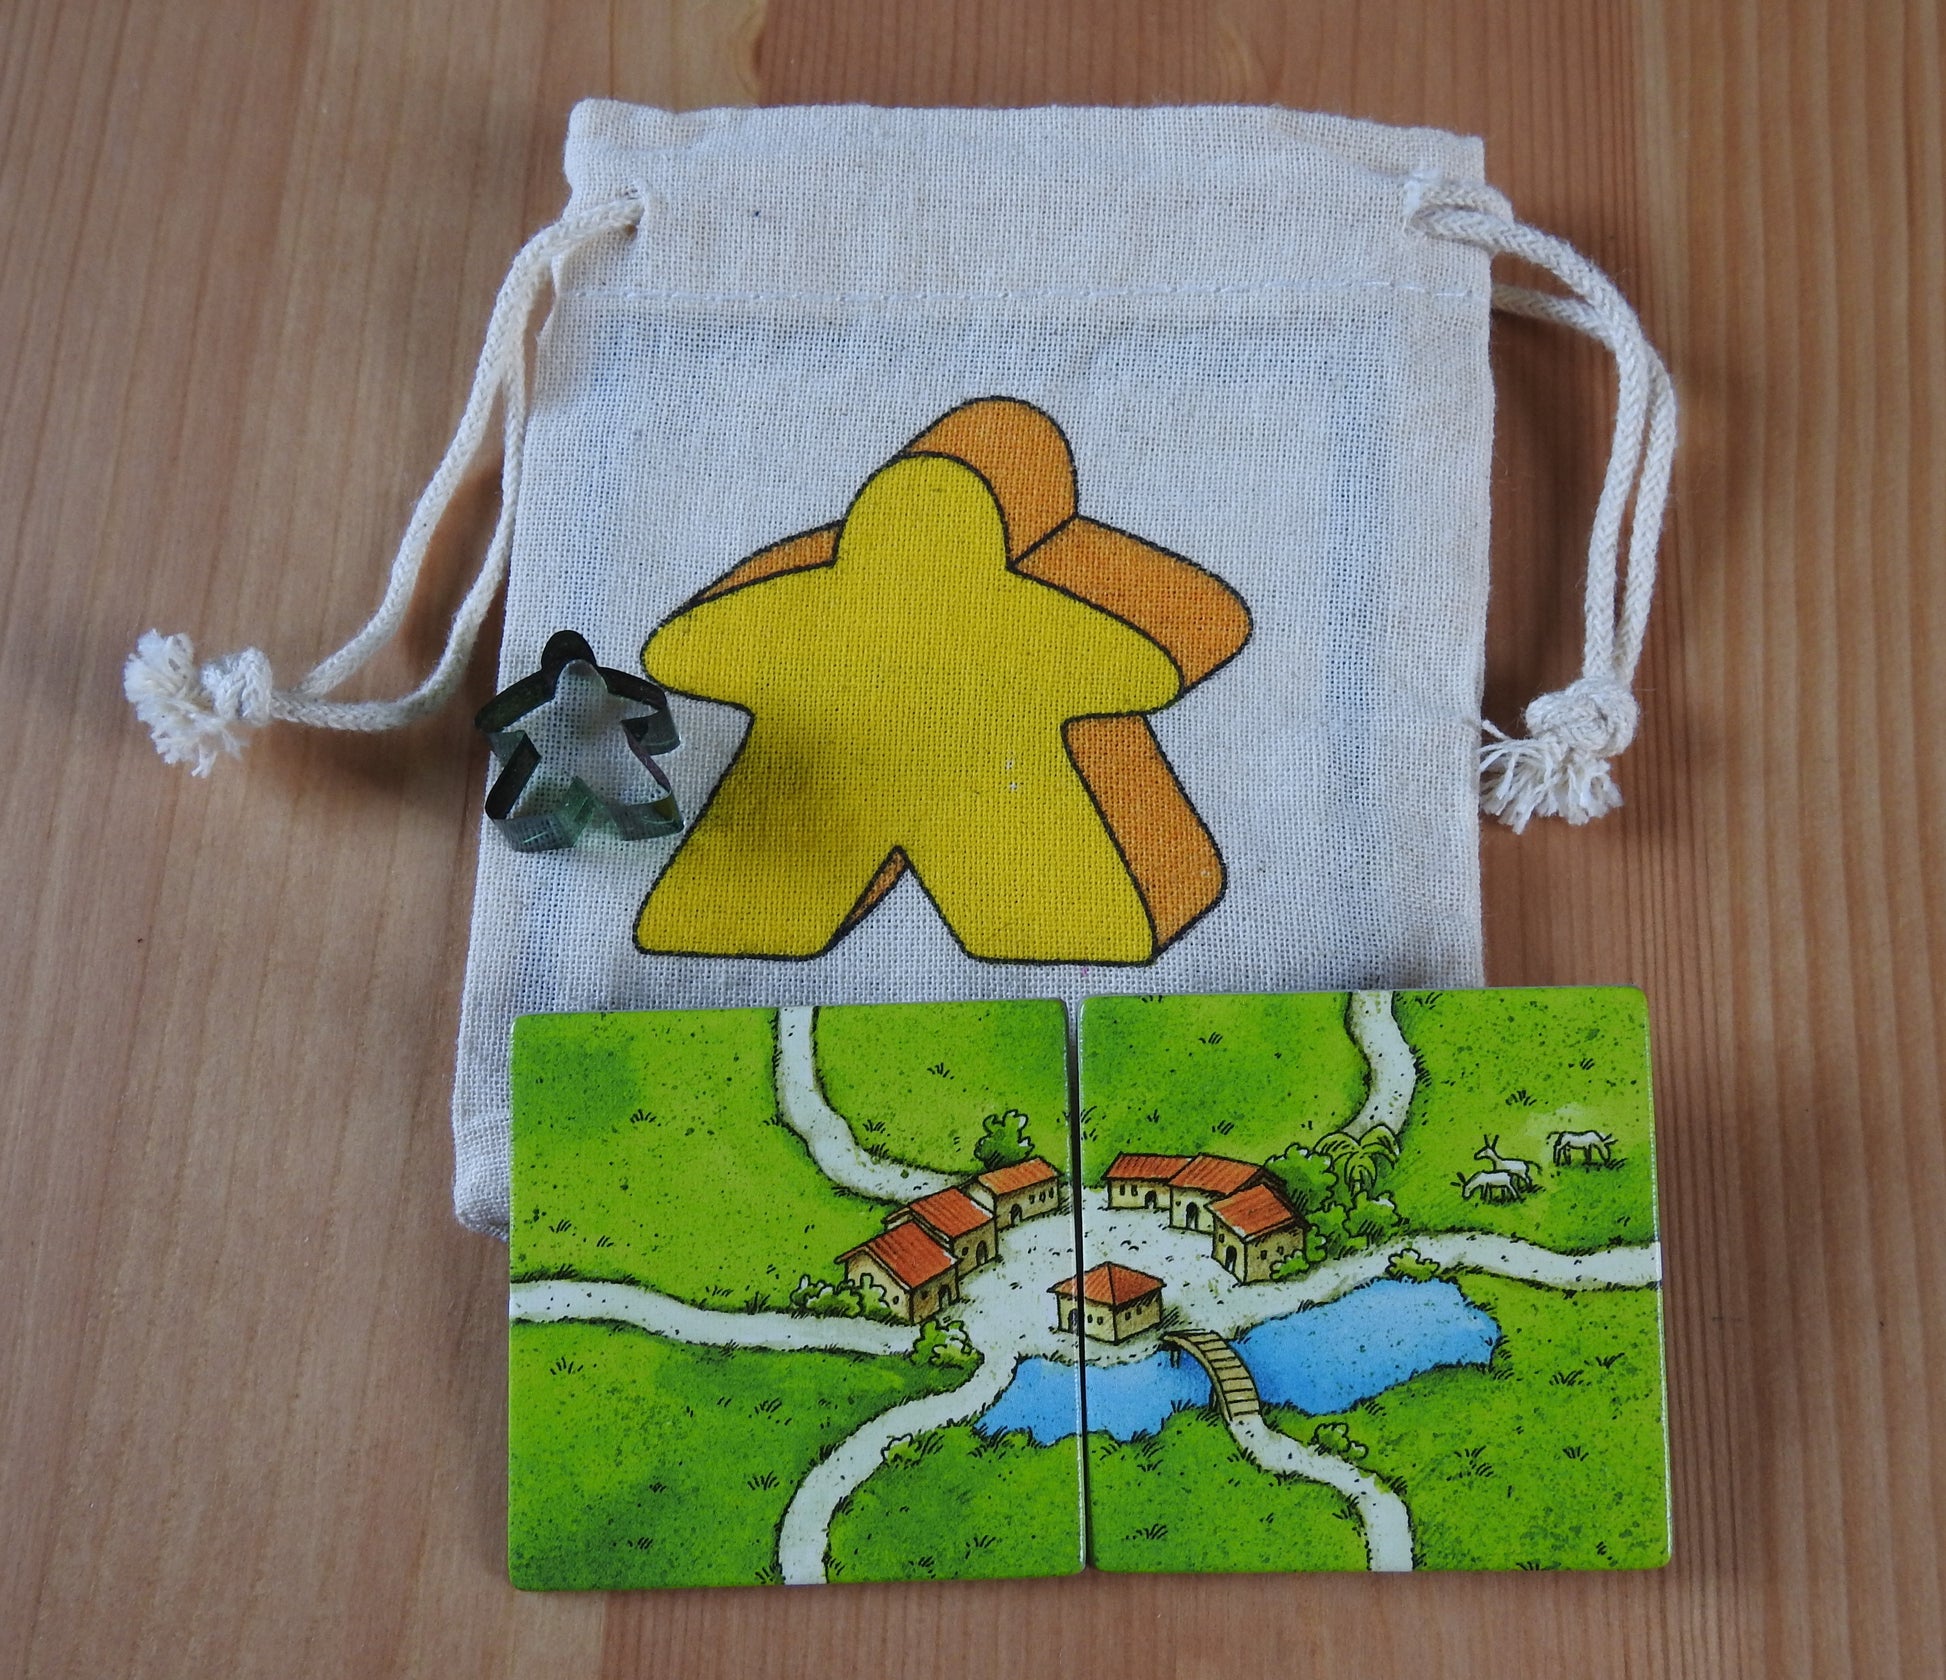 Close-up of the yellow meeple bag, green meeple teacher and 2 tiles.